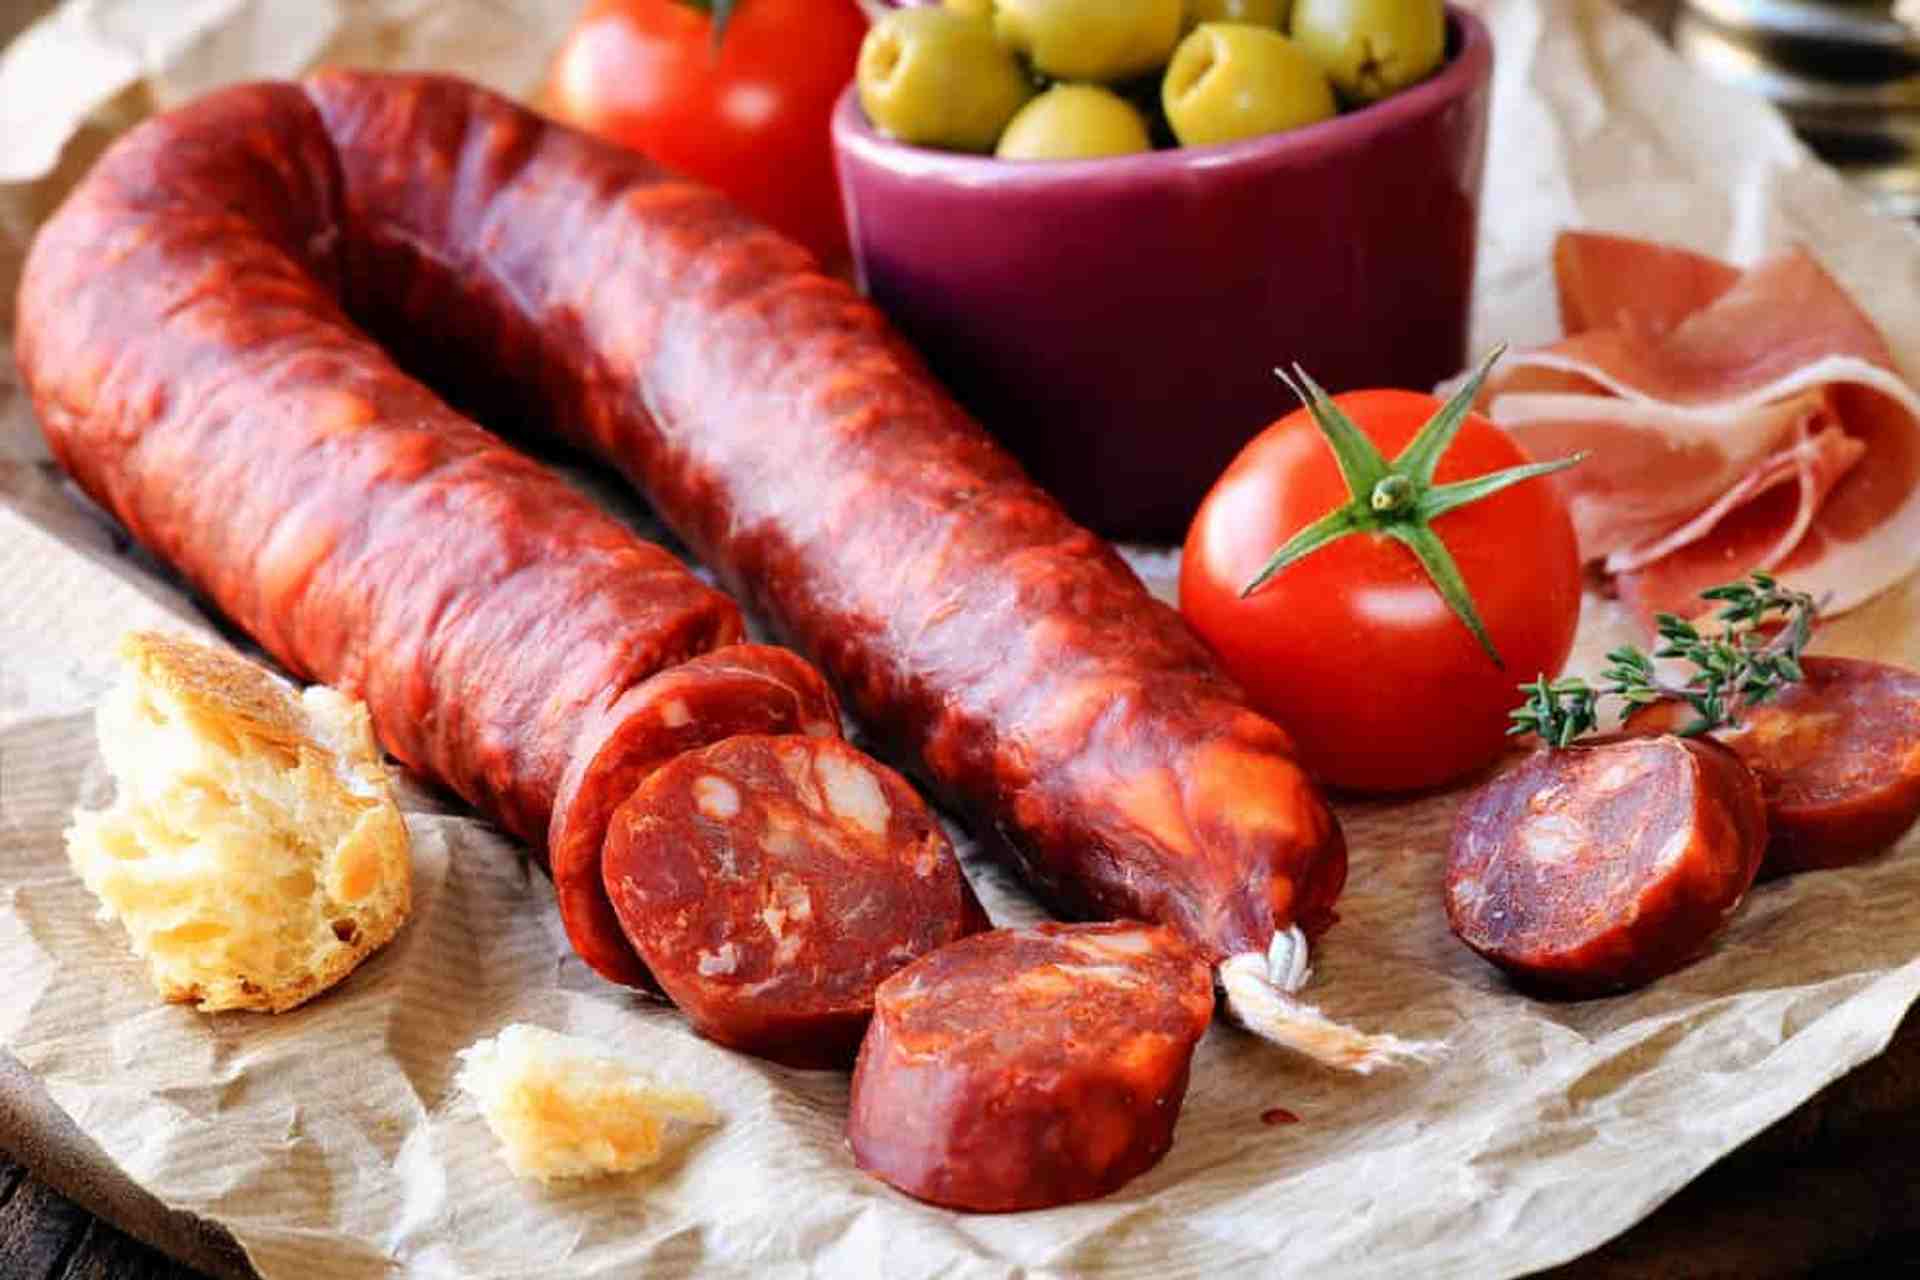 How Do You Know When Chorizo Is Done?